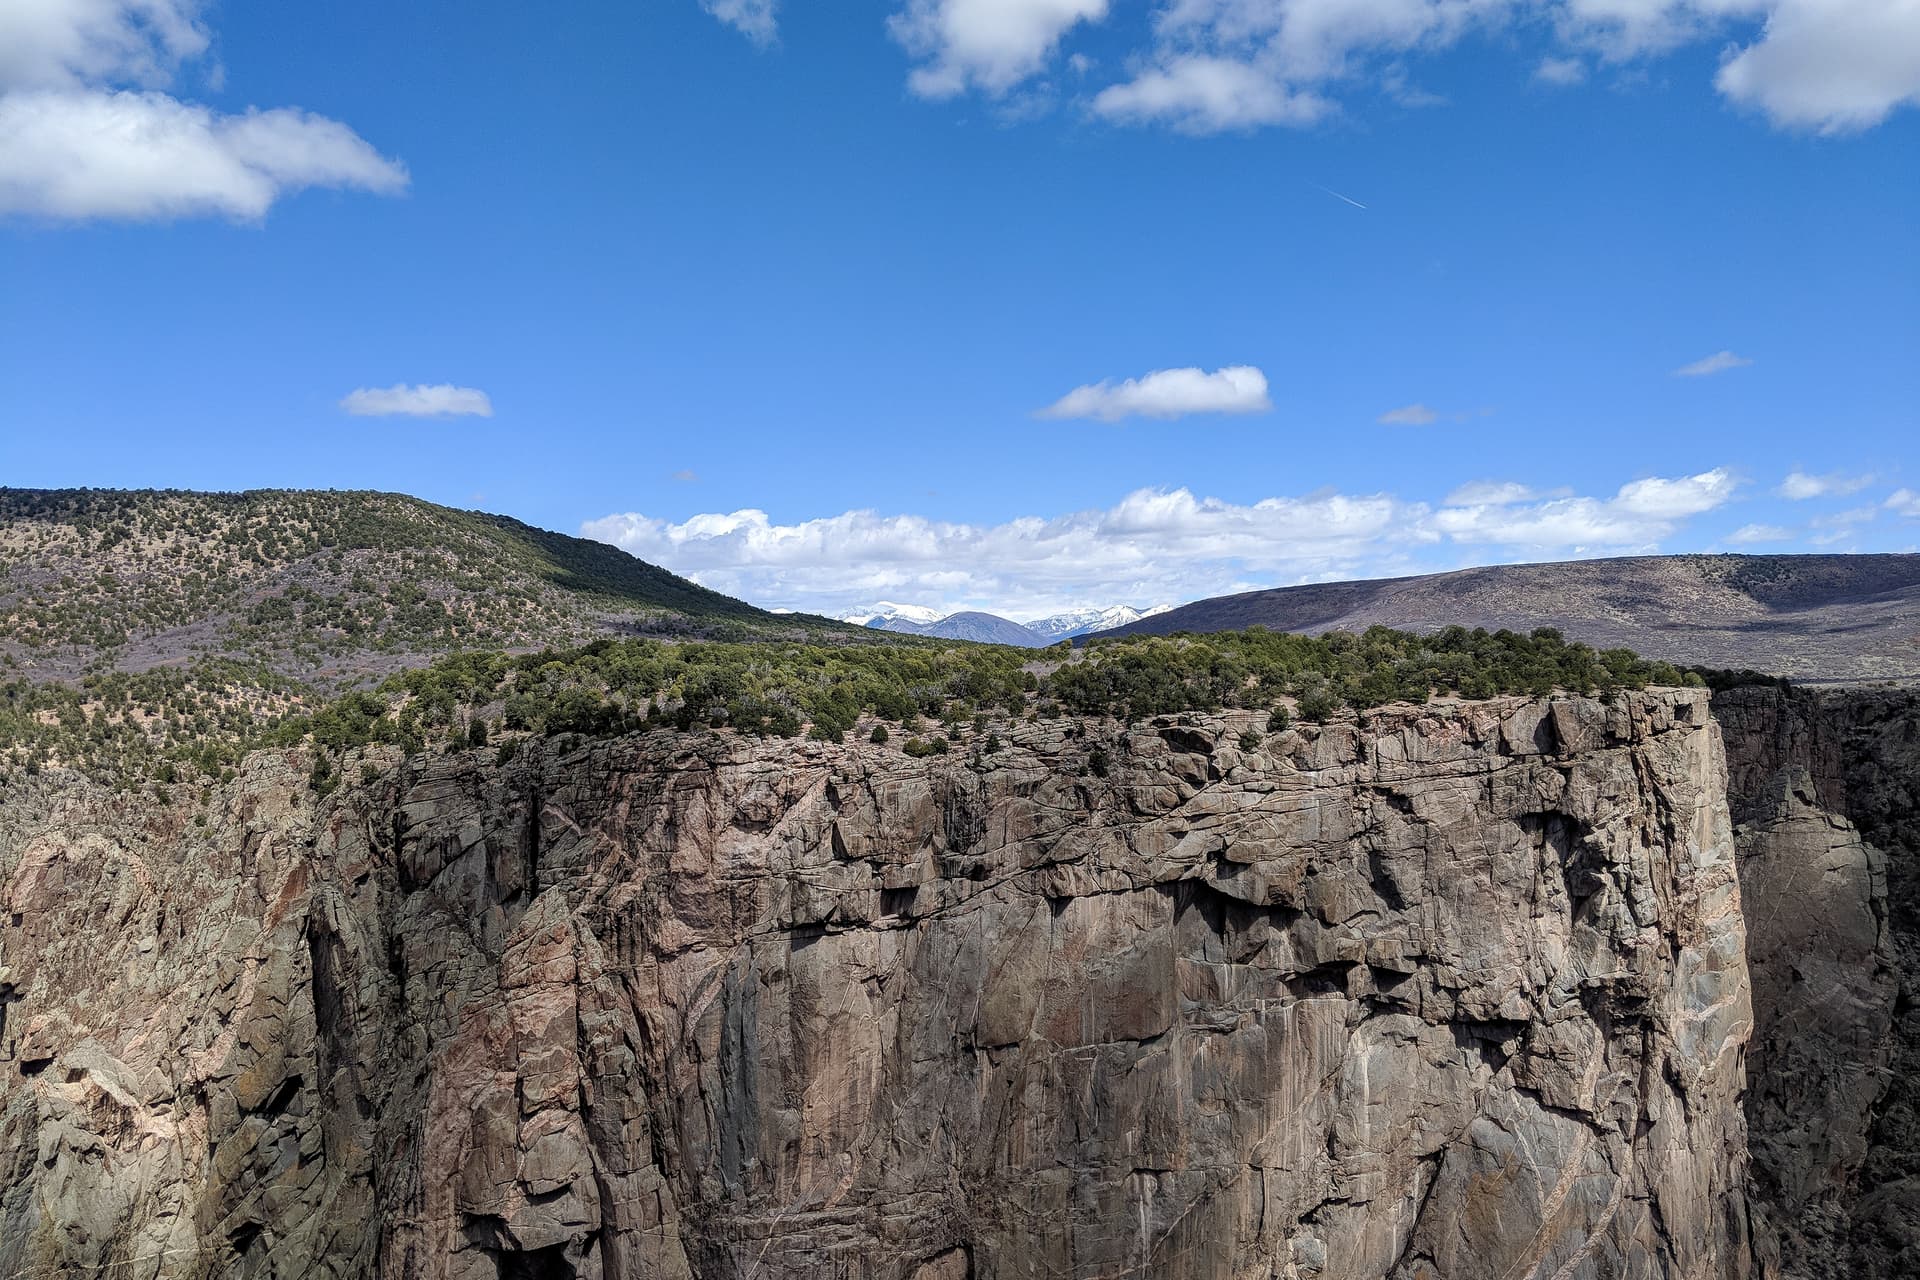 Looking straight across the Black Canyon of the Gunnison to the north rim's high plateau. In the distance, ramed by two low, wide hills, can be seen a range of domed, snow-capped mountains.